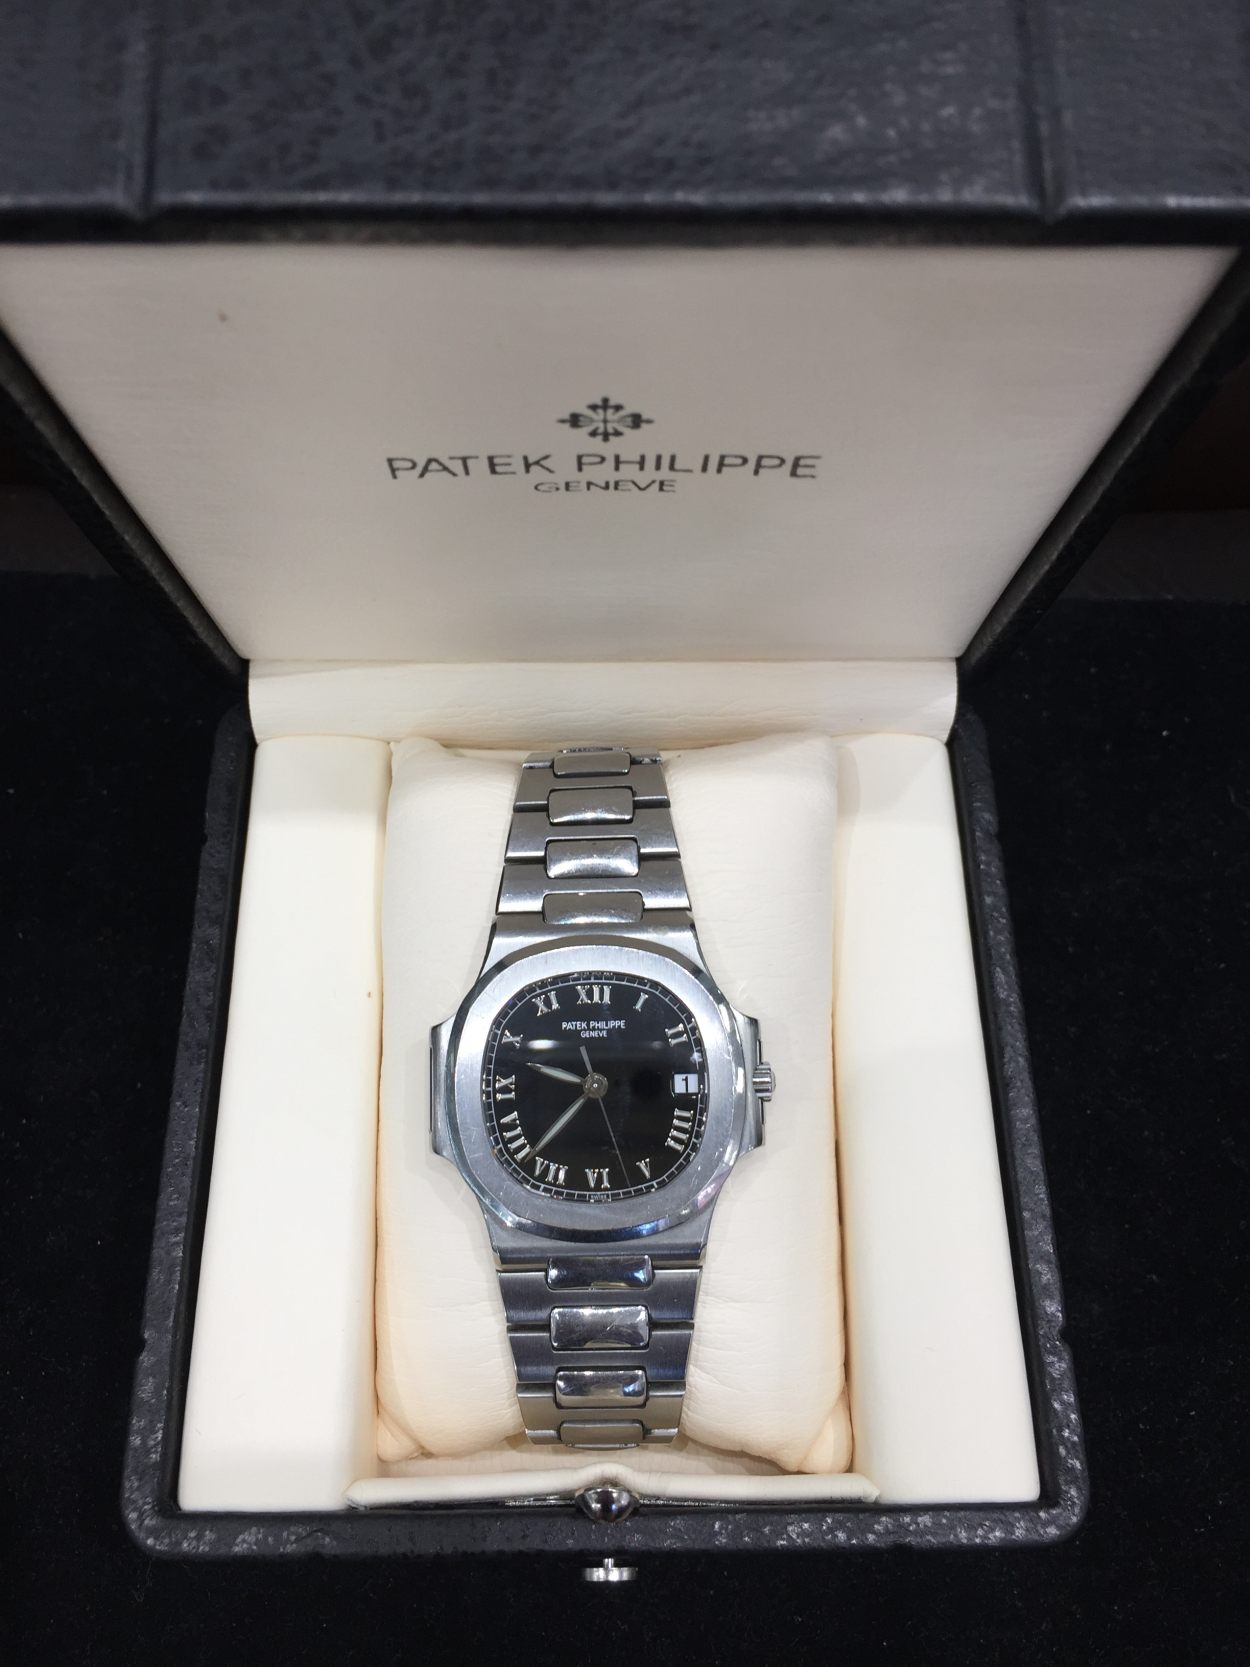 Sell A Patek Philippe Watch